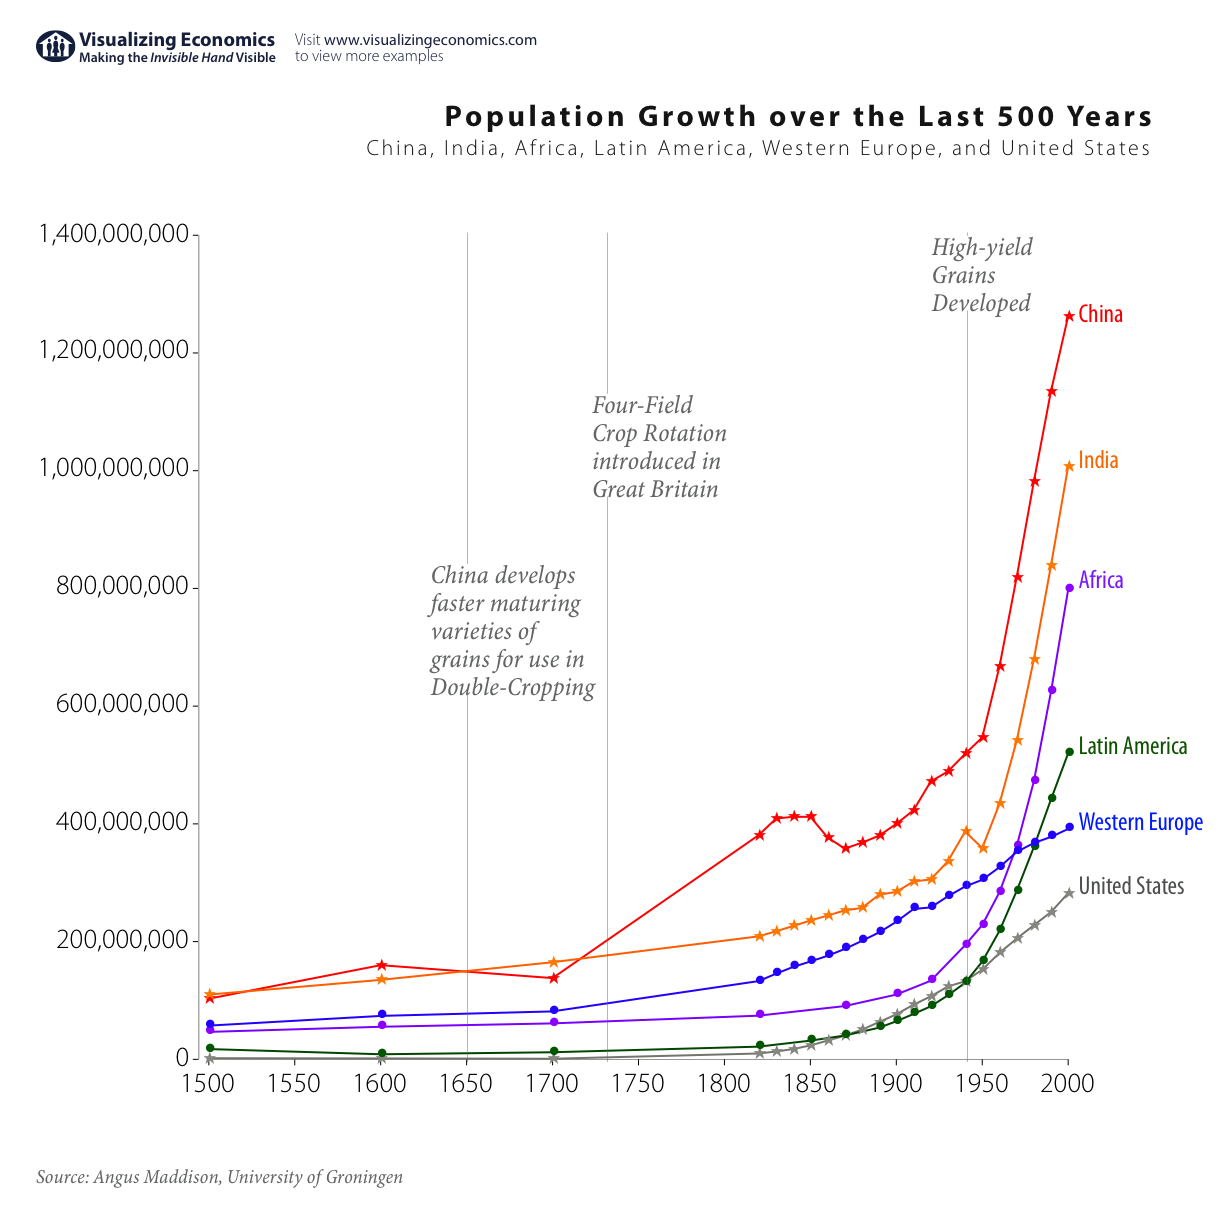 Population Growth over the Last 500 Years